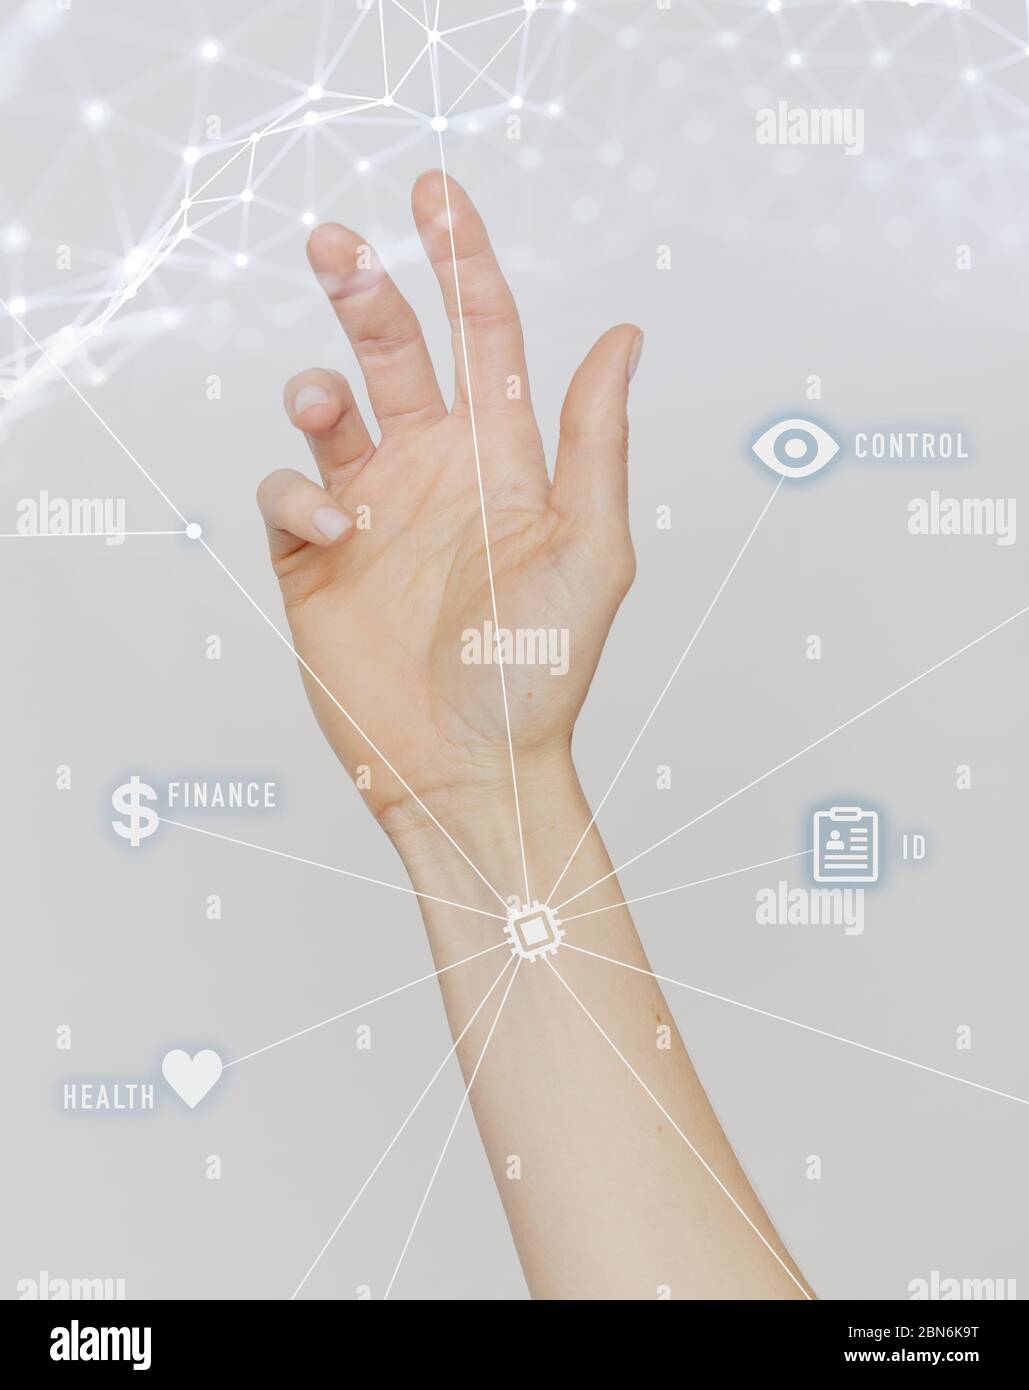 Human Chipping, Multipassport, Identification, Digitalization and Vaccination Concept. Hand With Implanted Chip Containing Information About Finances, Stock Photo